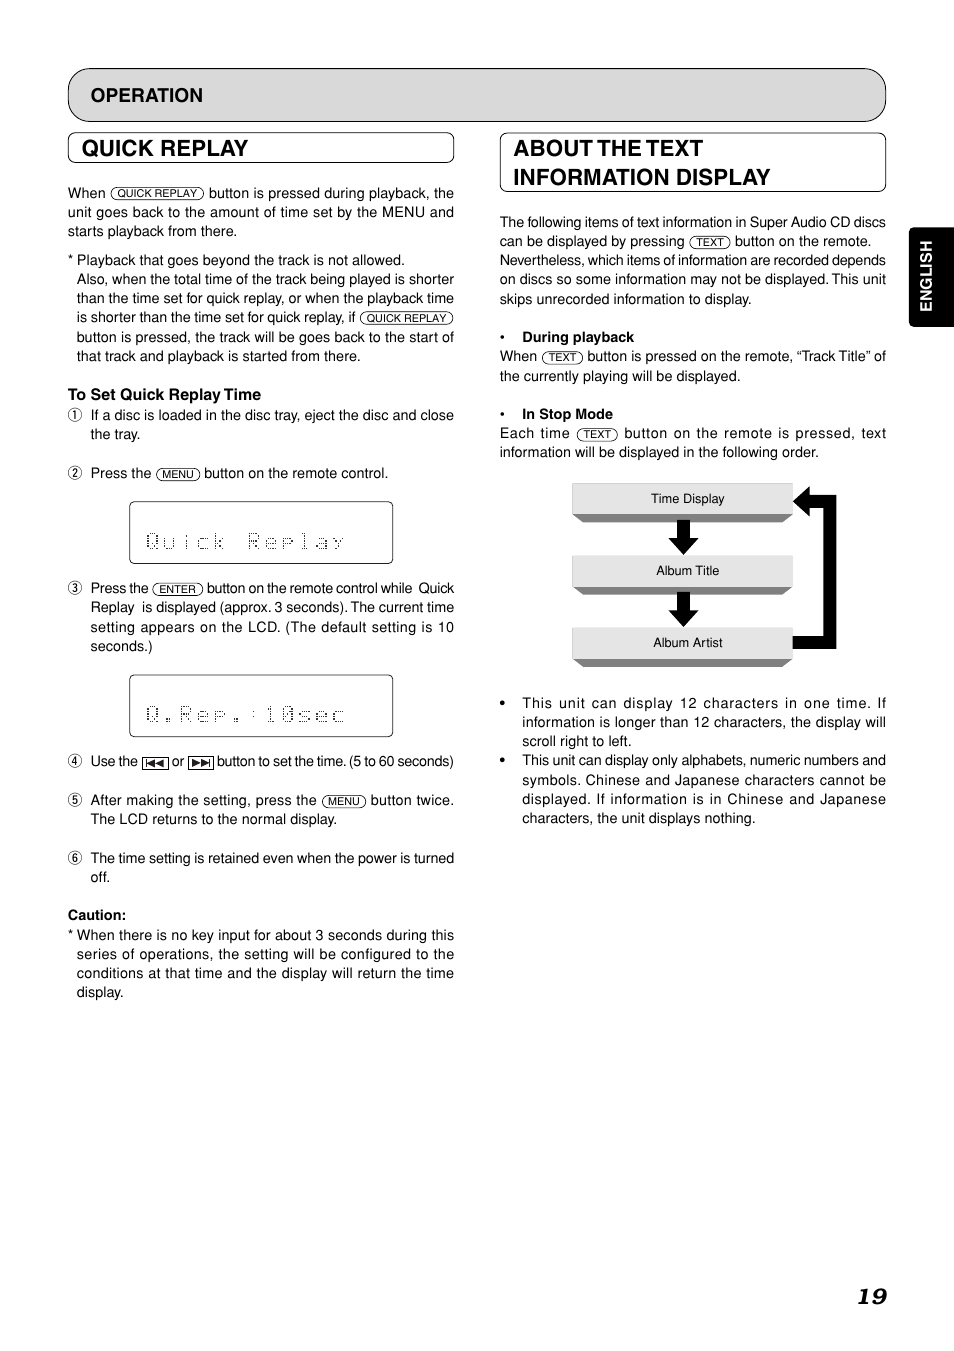 19 quick replay, About the text information display, Operation | Marantz SA-11S1 User Manual | Page 24 / 29